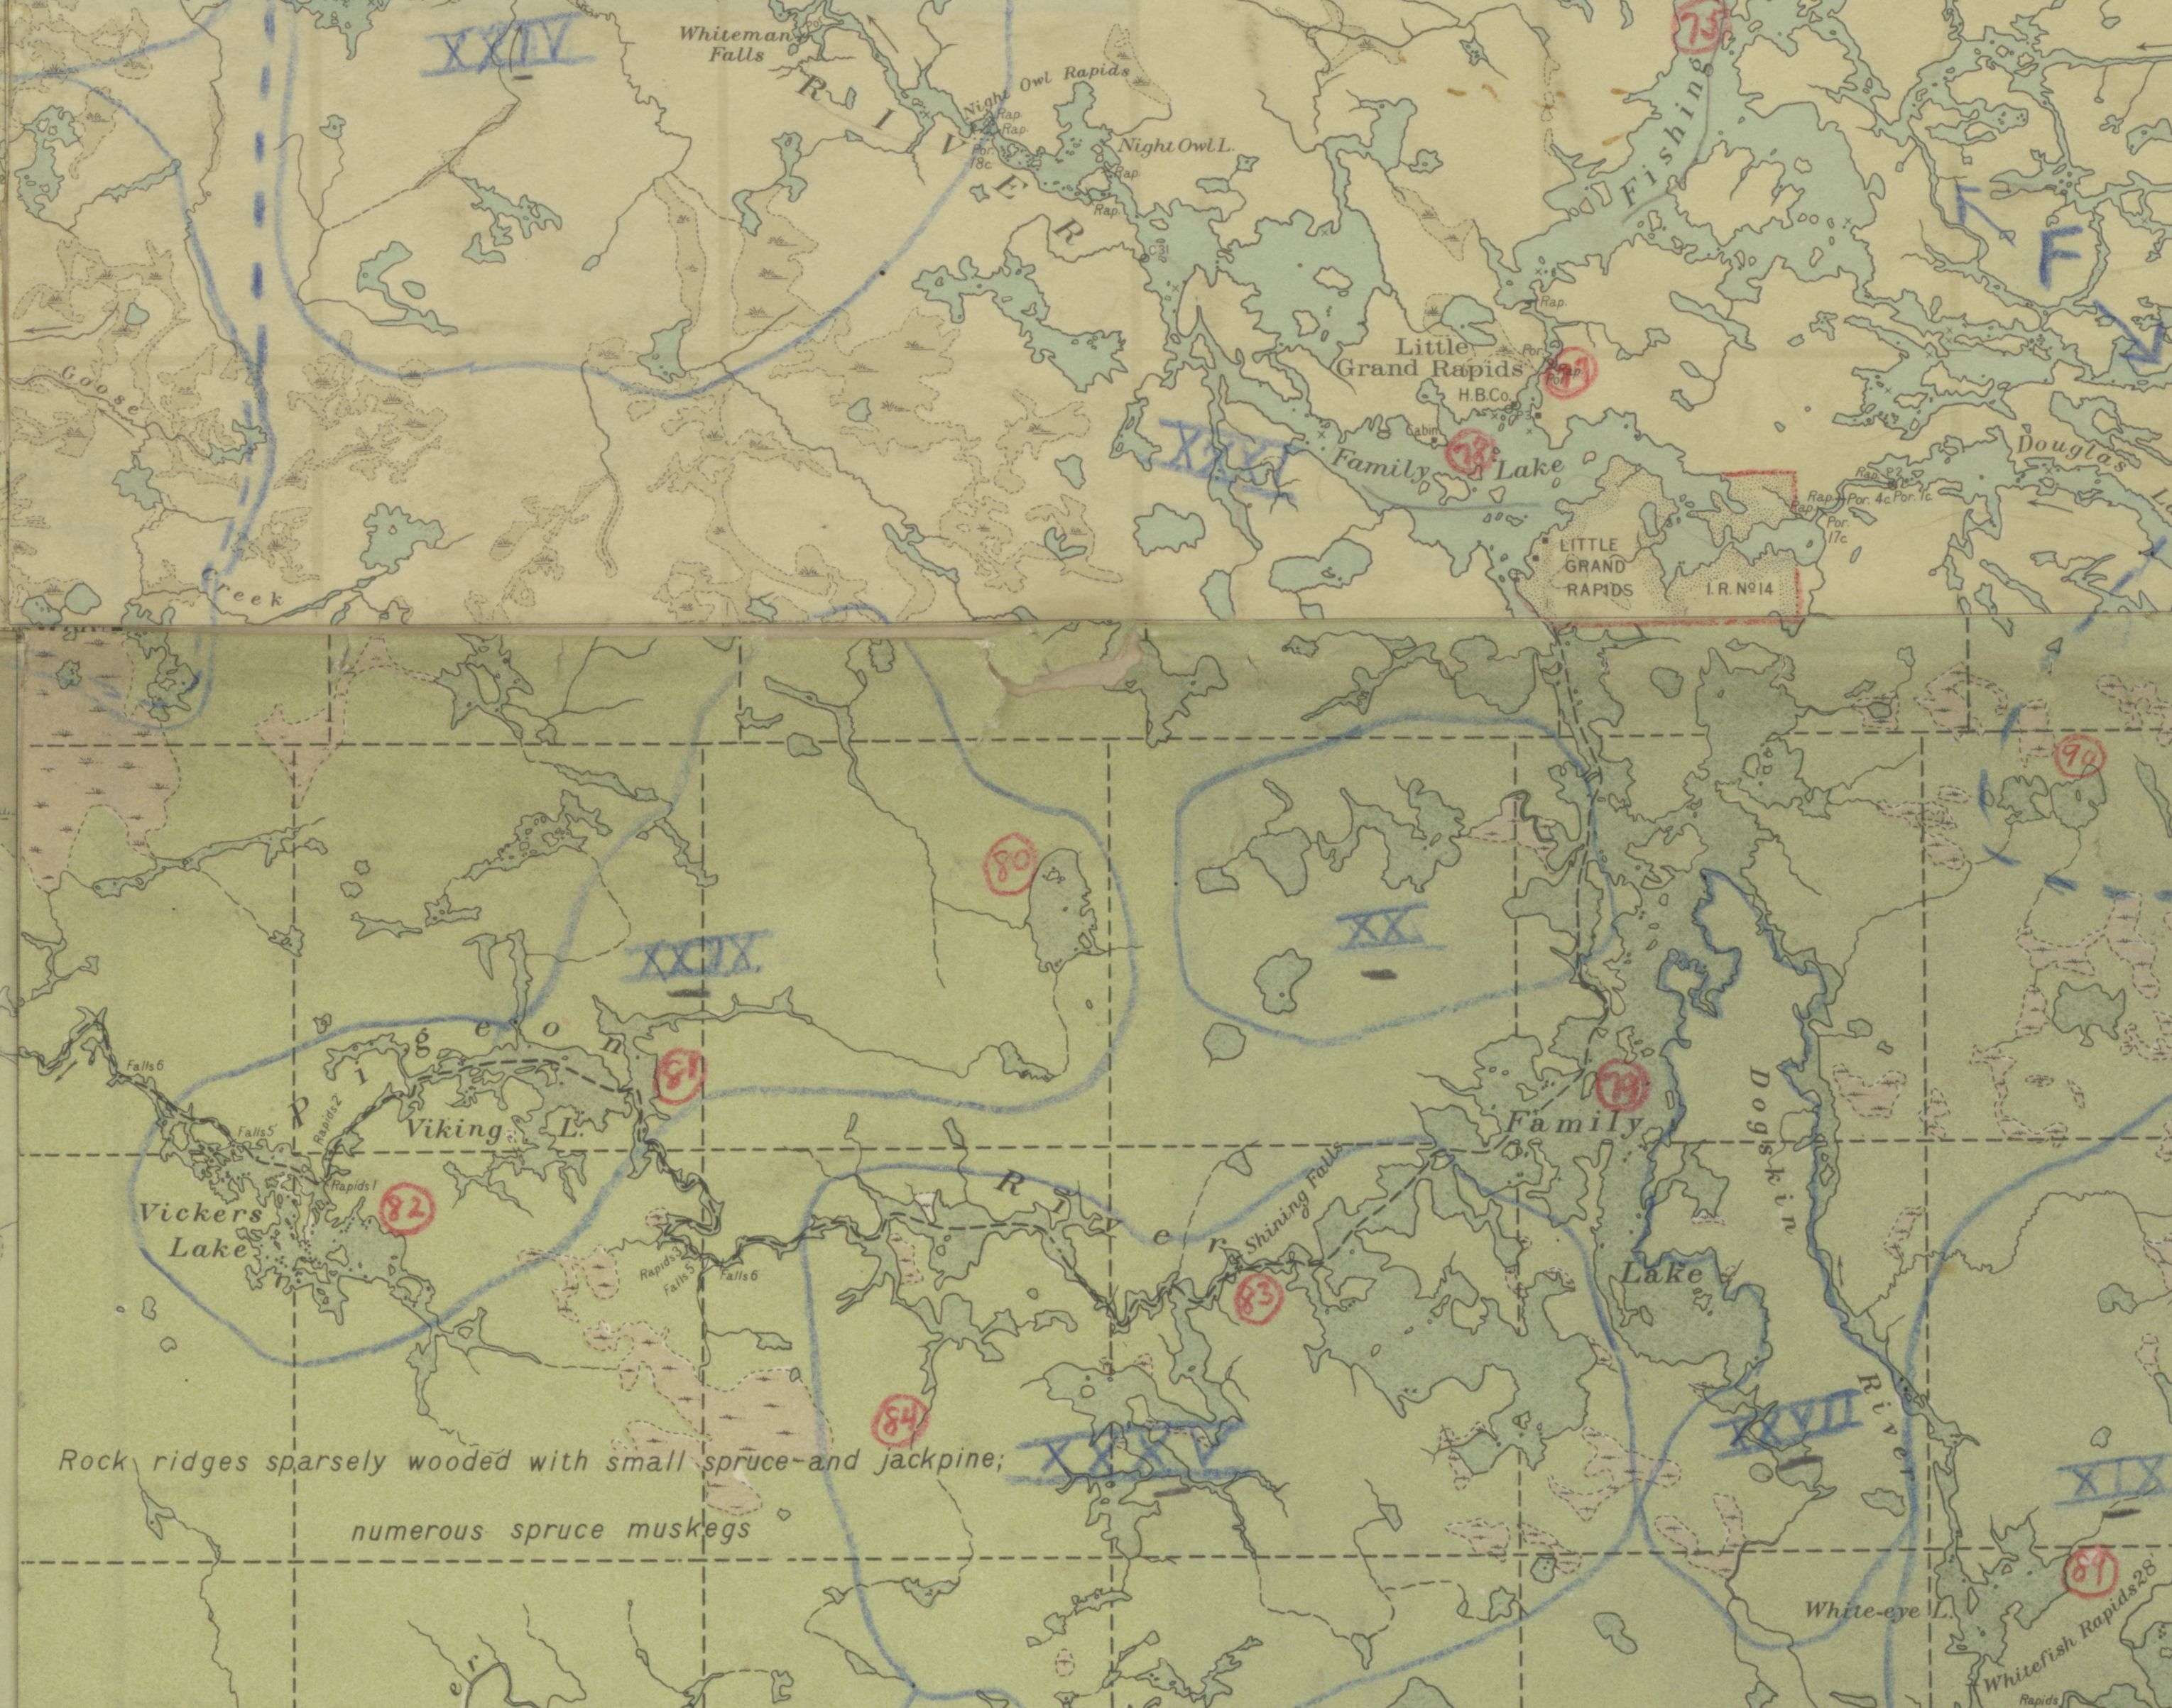 Image of Hallowell's annotations of Ojibwe land use on a map of the region east of Lake Winnipeg